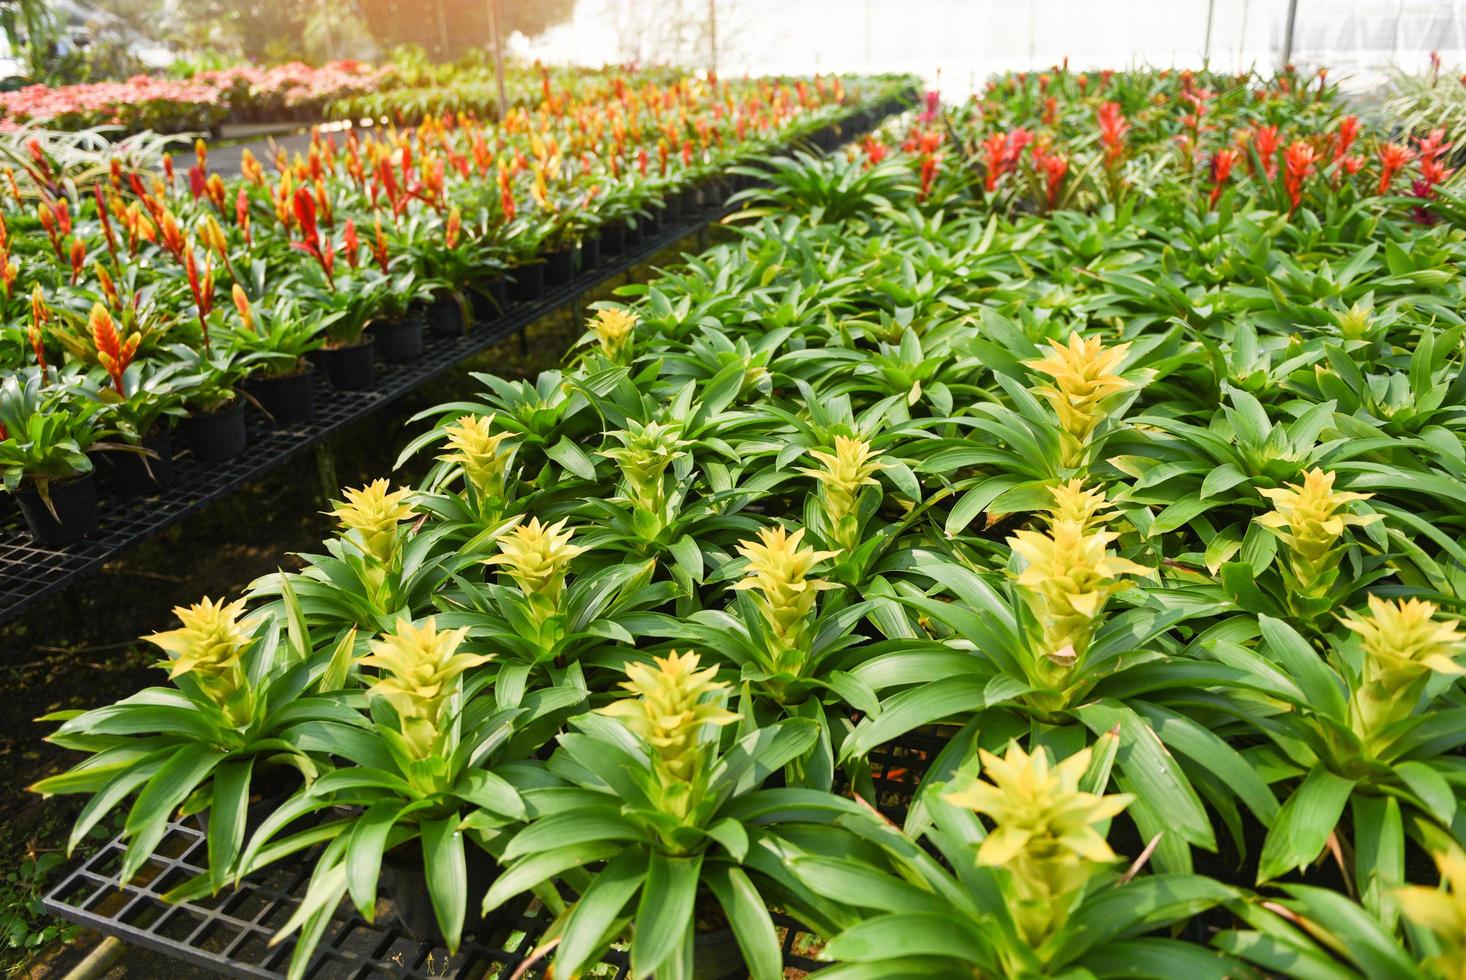 Bromeliad flower nursery farm ornamental and flower green plant growing in the garden greenhouse under roof photo